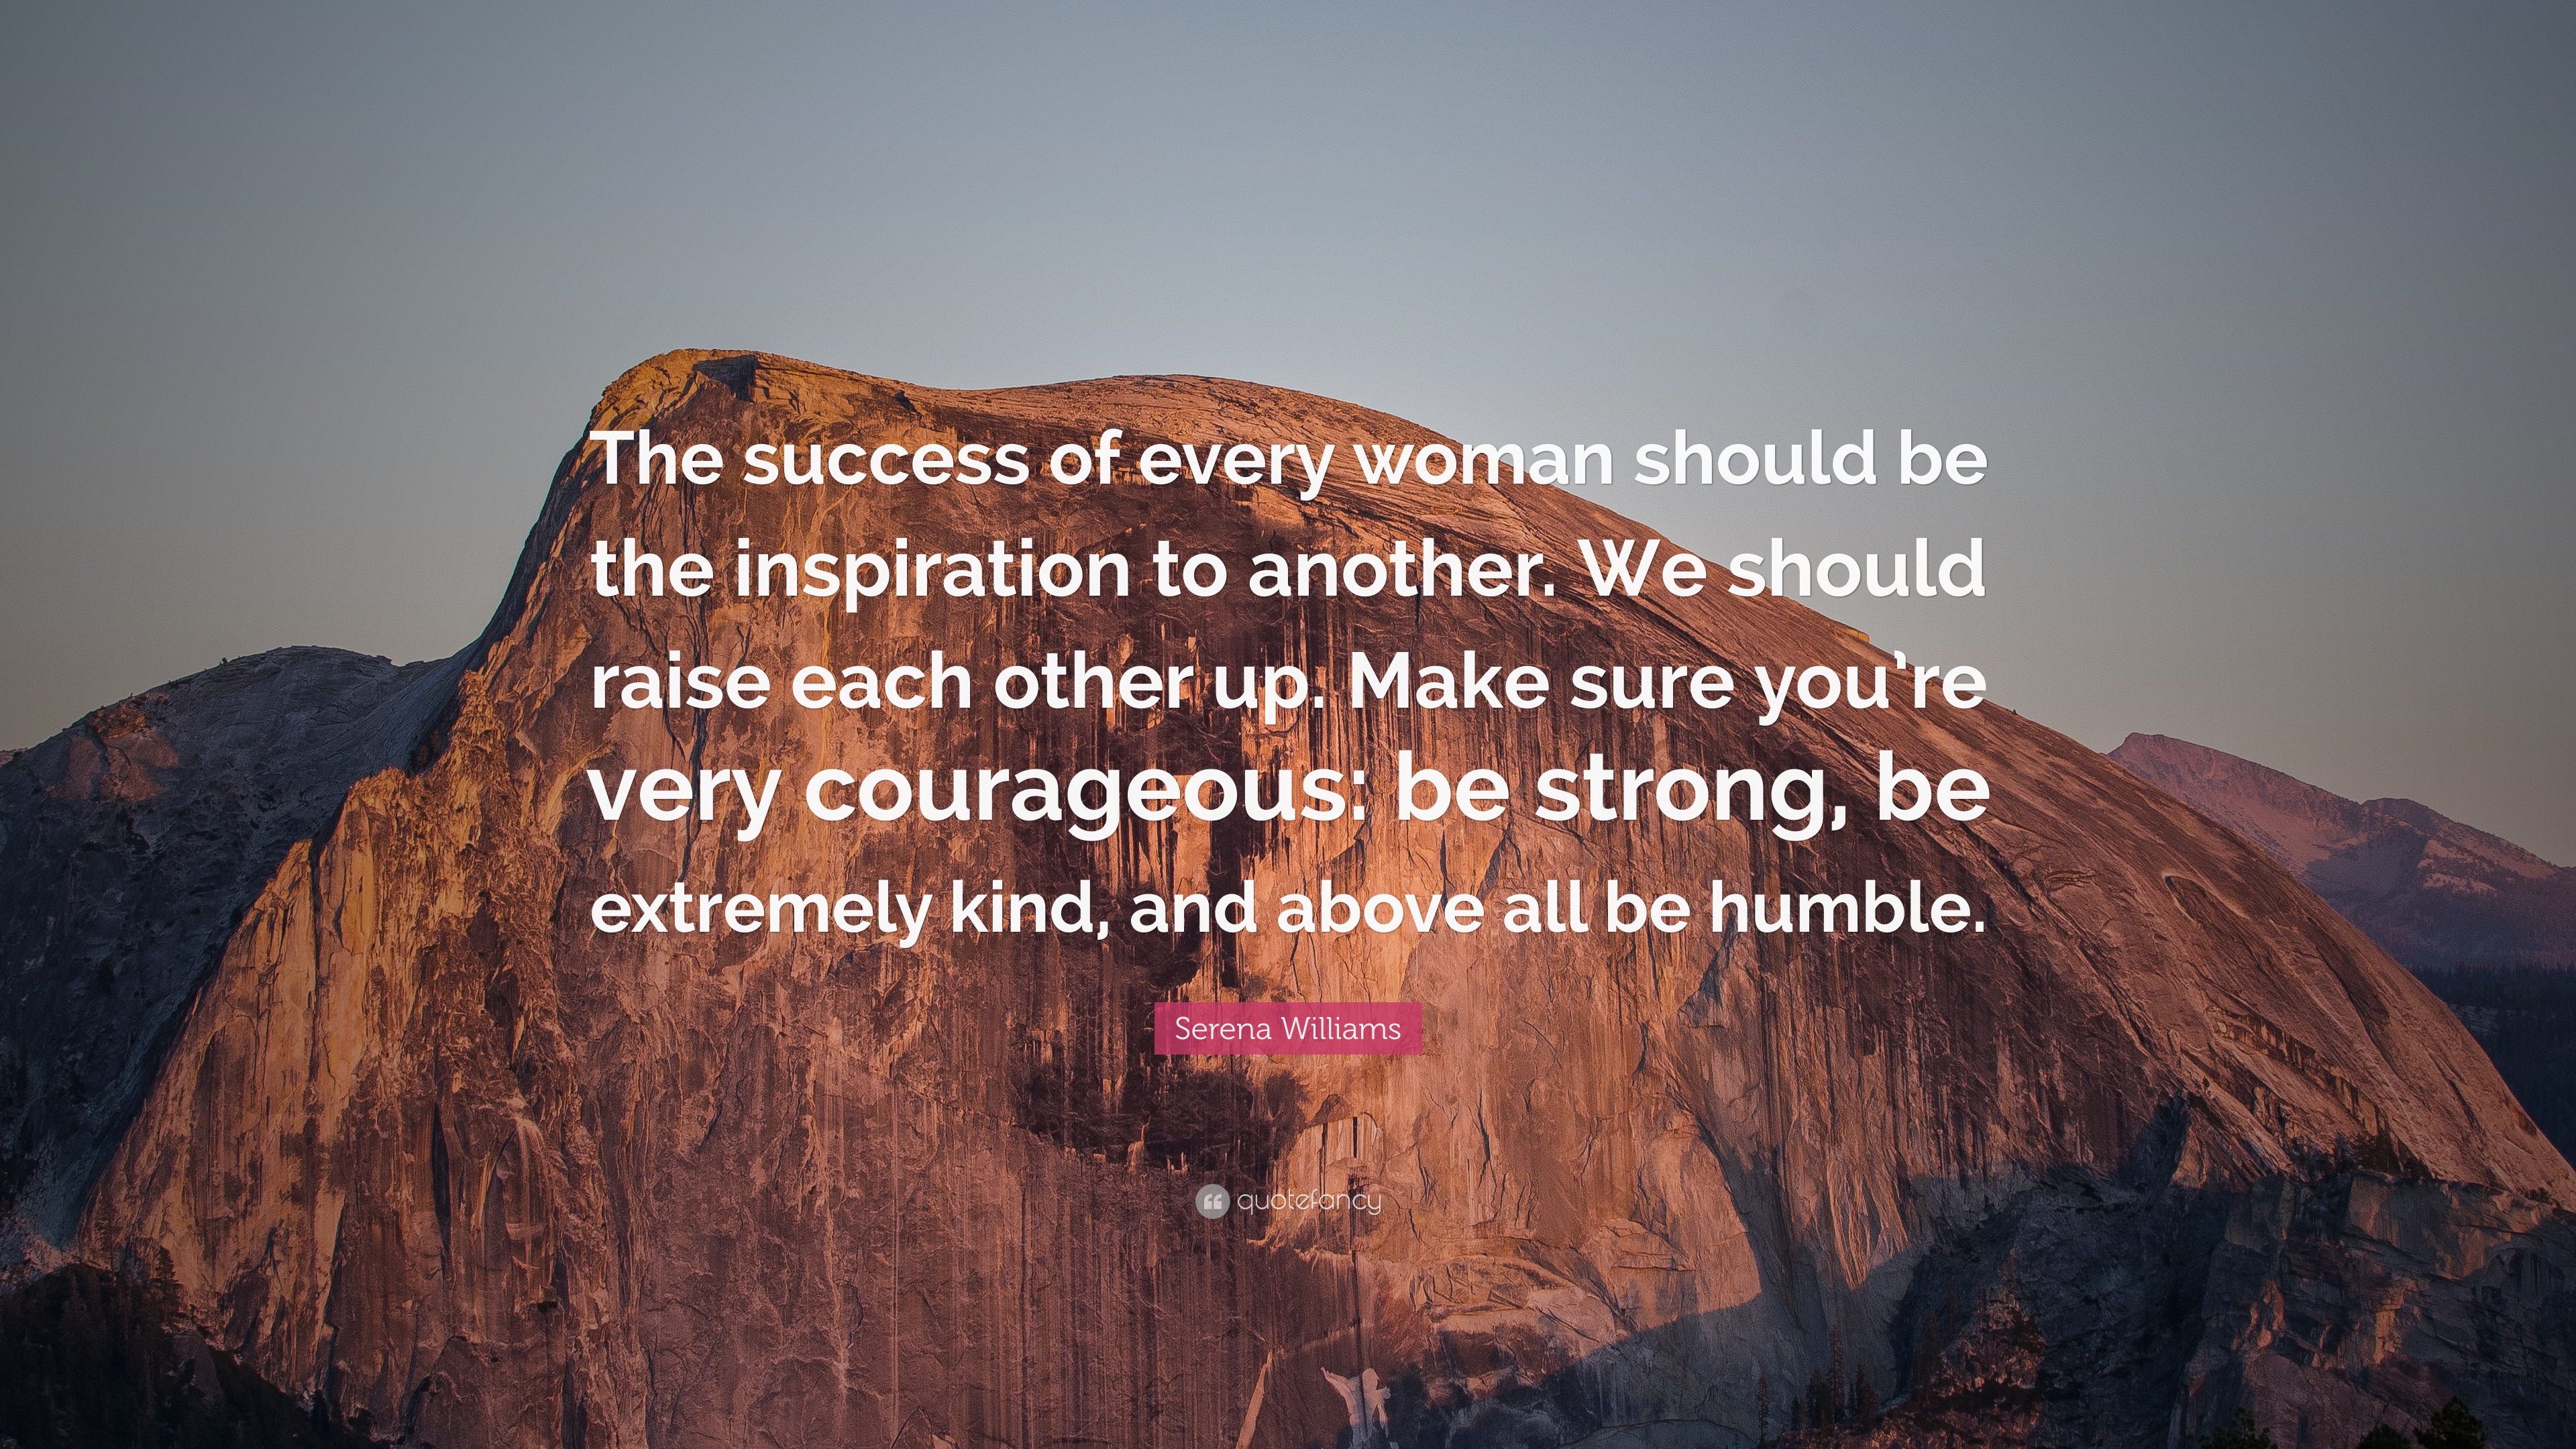 Serena Williams Quote: “The success of every woman should be the